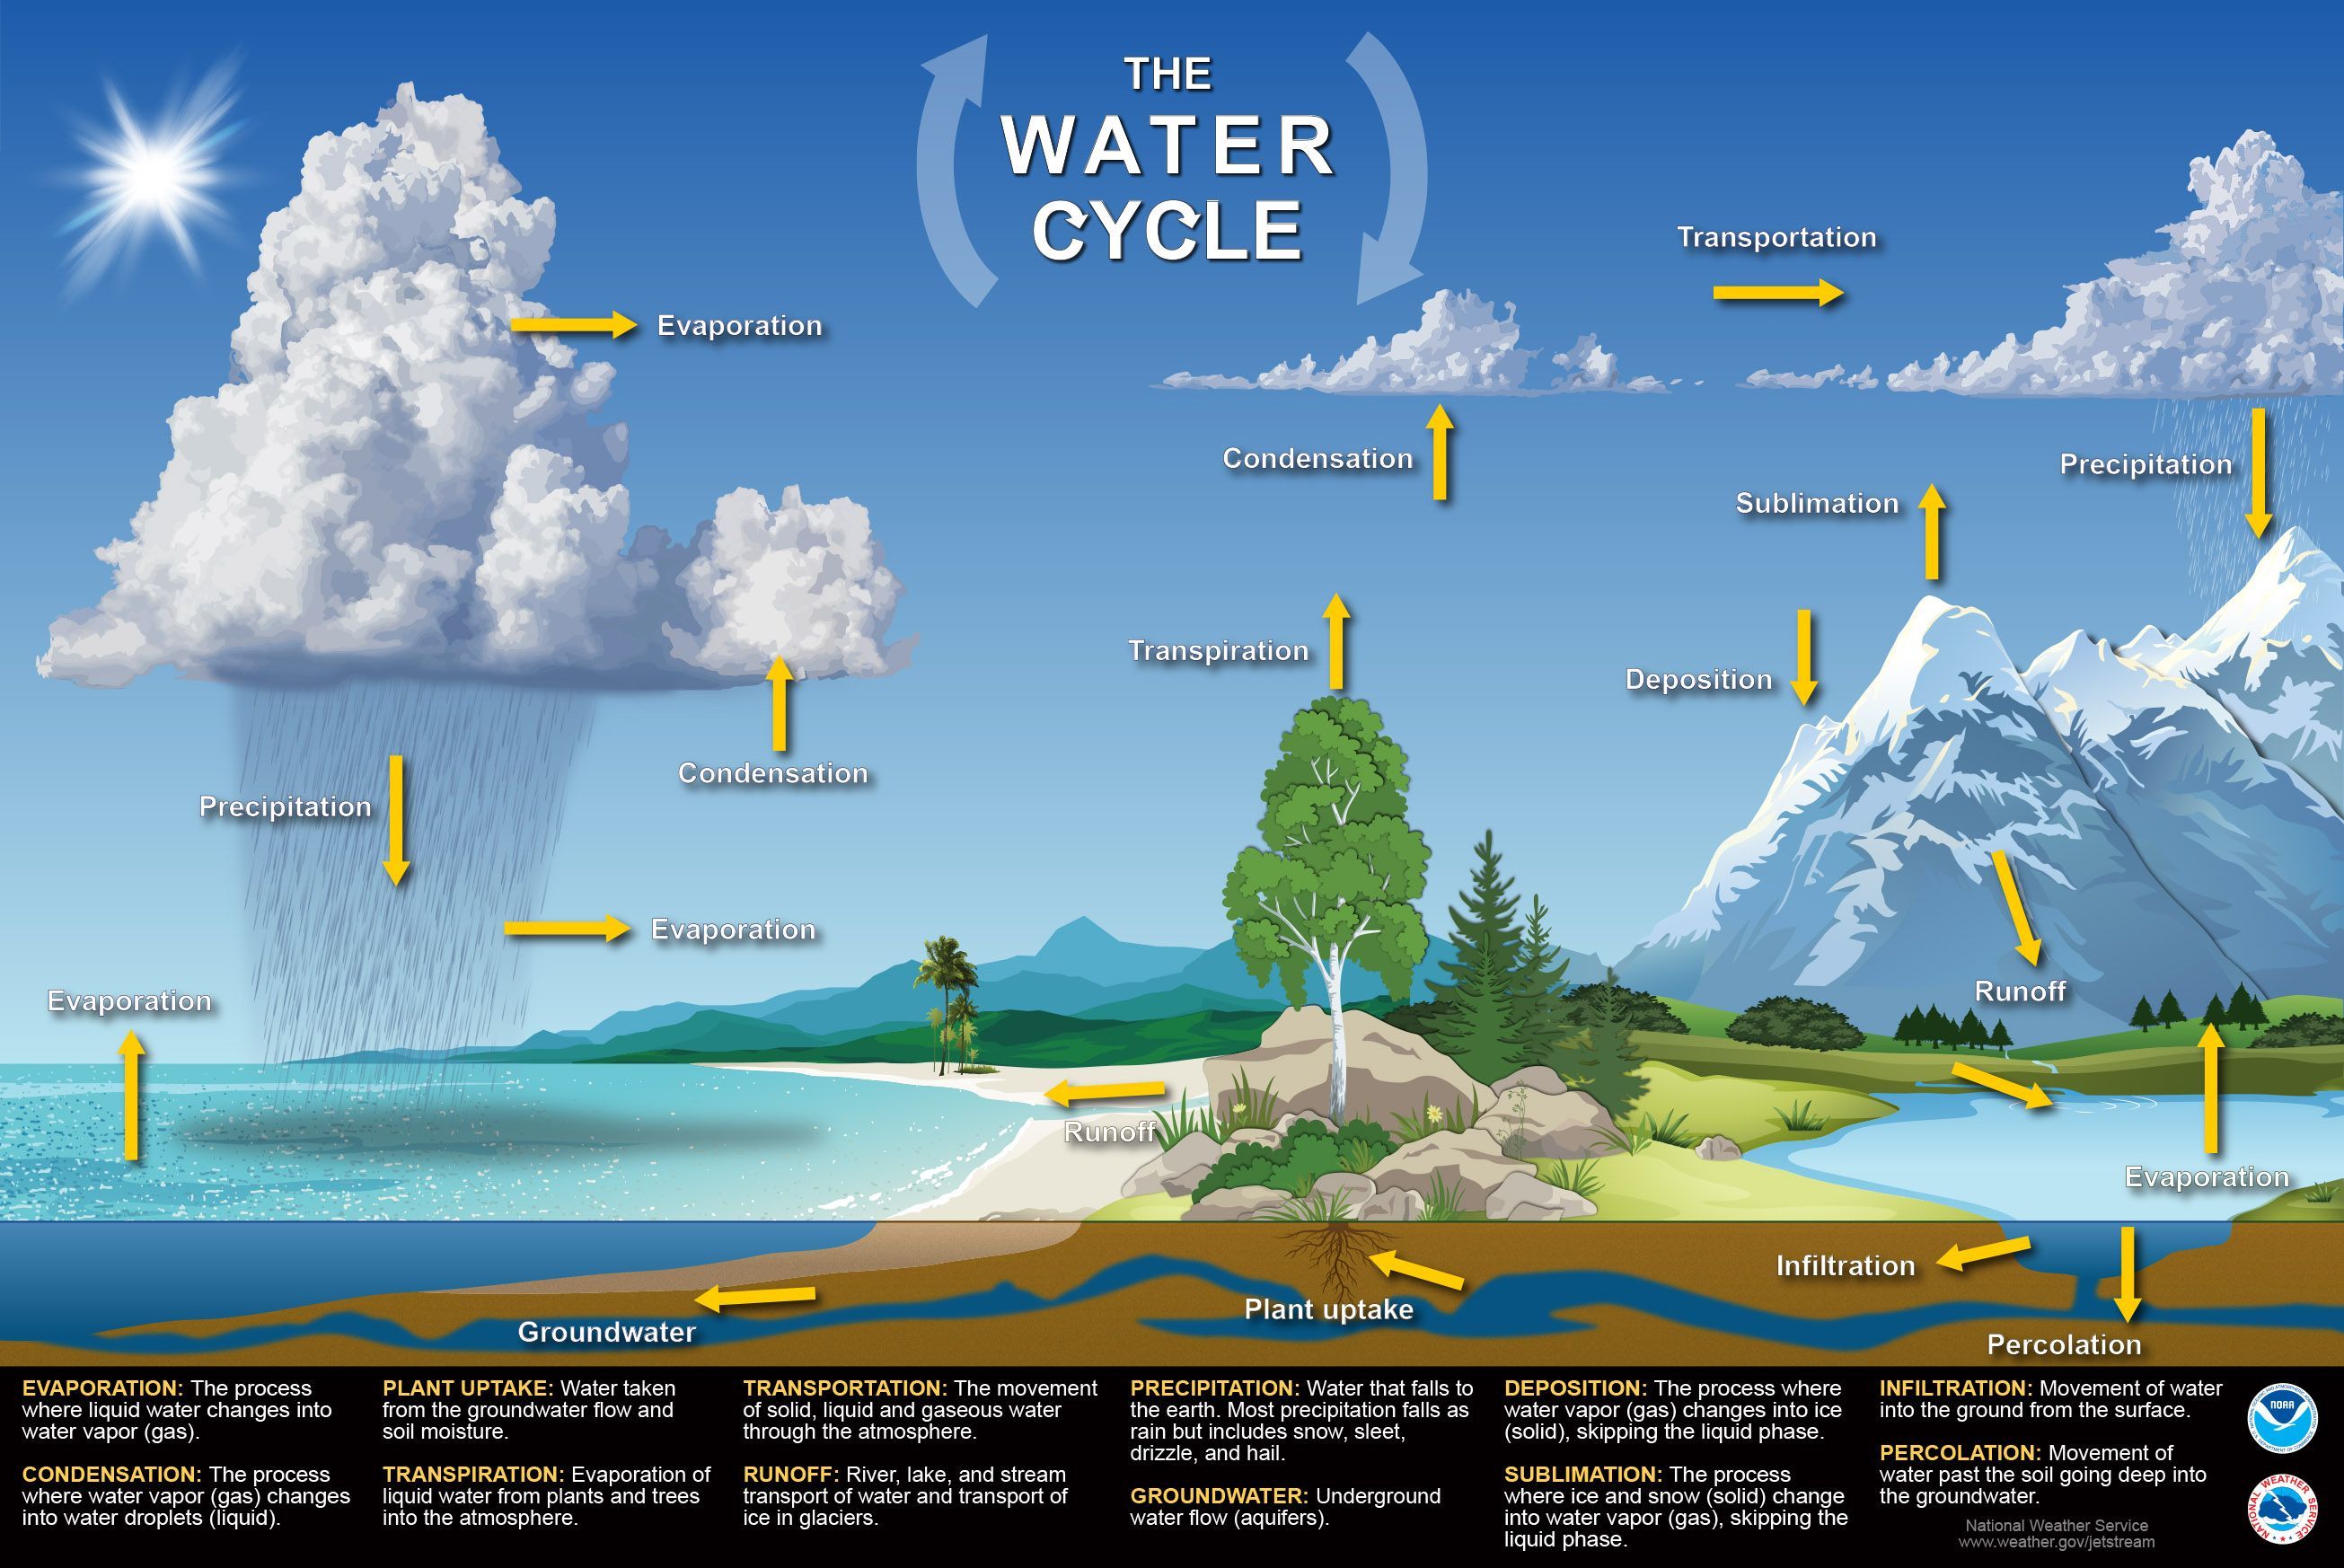 Matter and Energy Cycles: Modeling | National Geographic Society